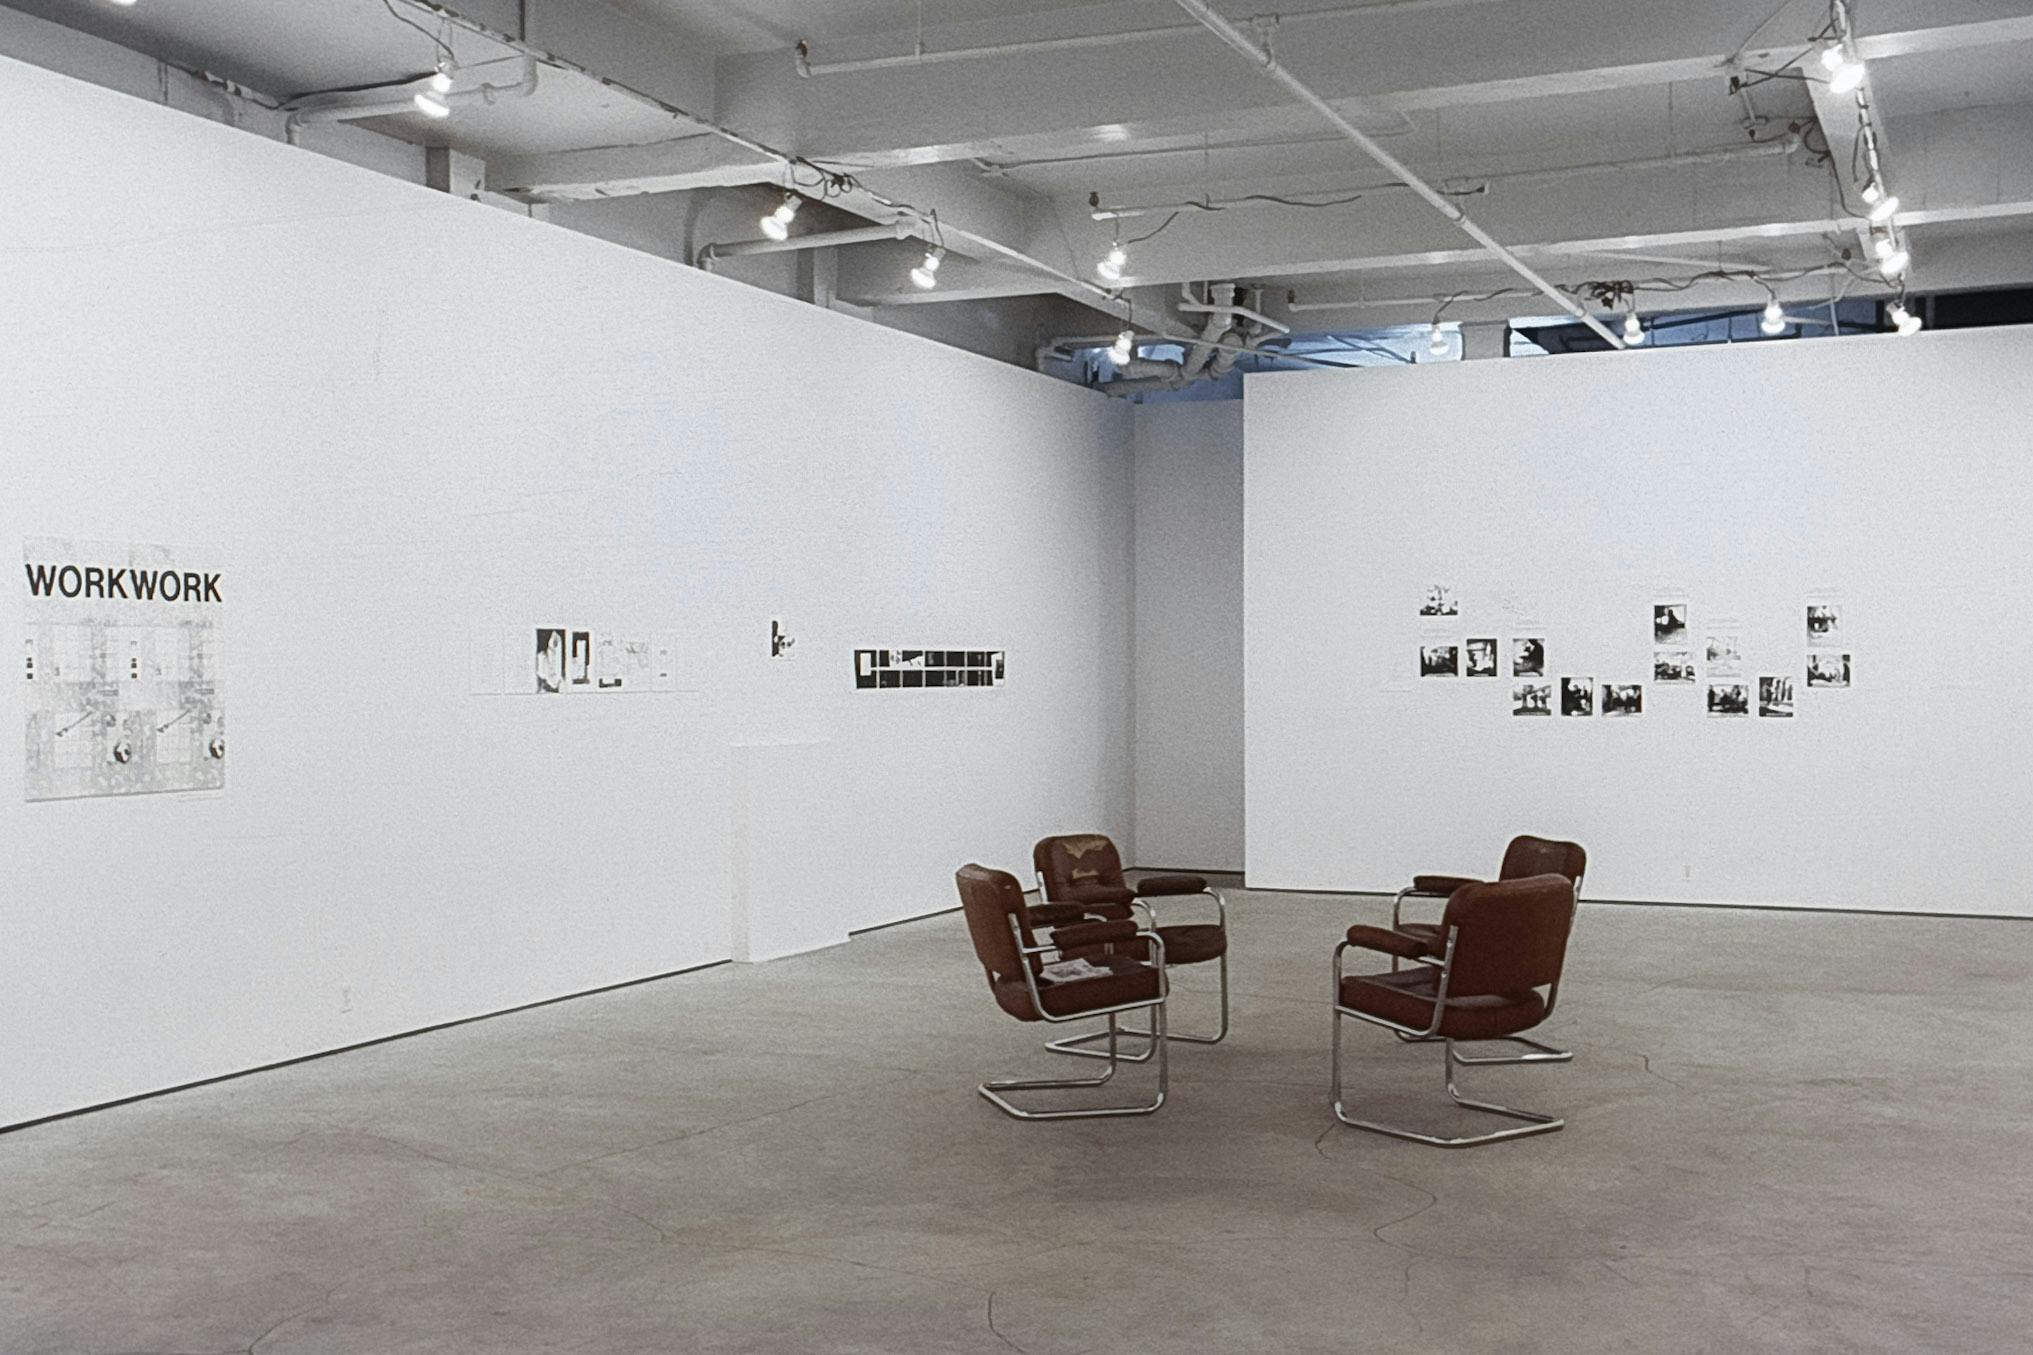 A gallery with artworks on the walls. Most are small black and white photos with text. One is a large set of blueprints, with letters reading "WorkWork." In the centre of the room, there are 4 chairs.